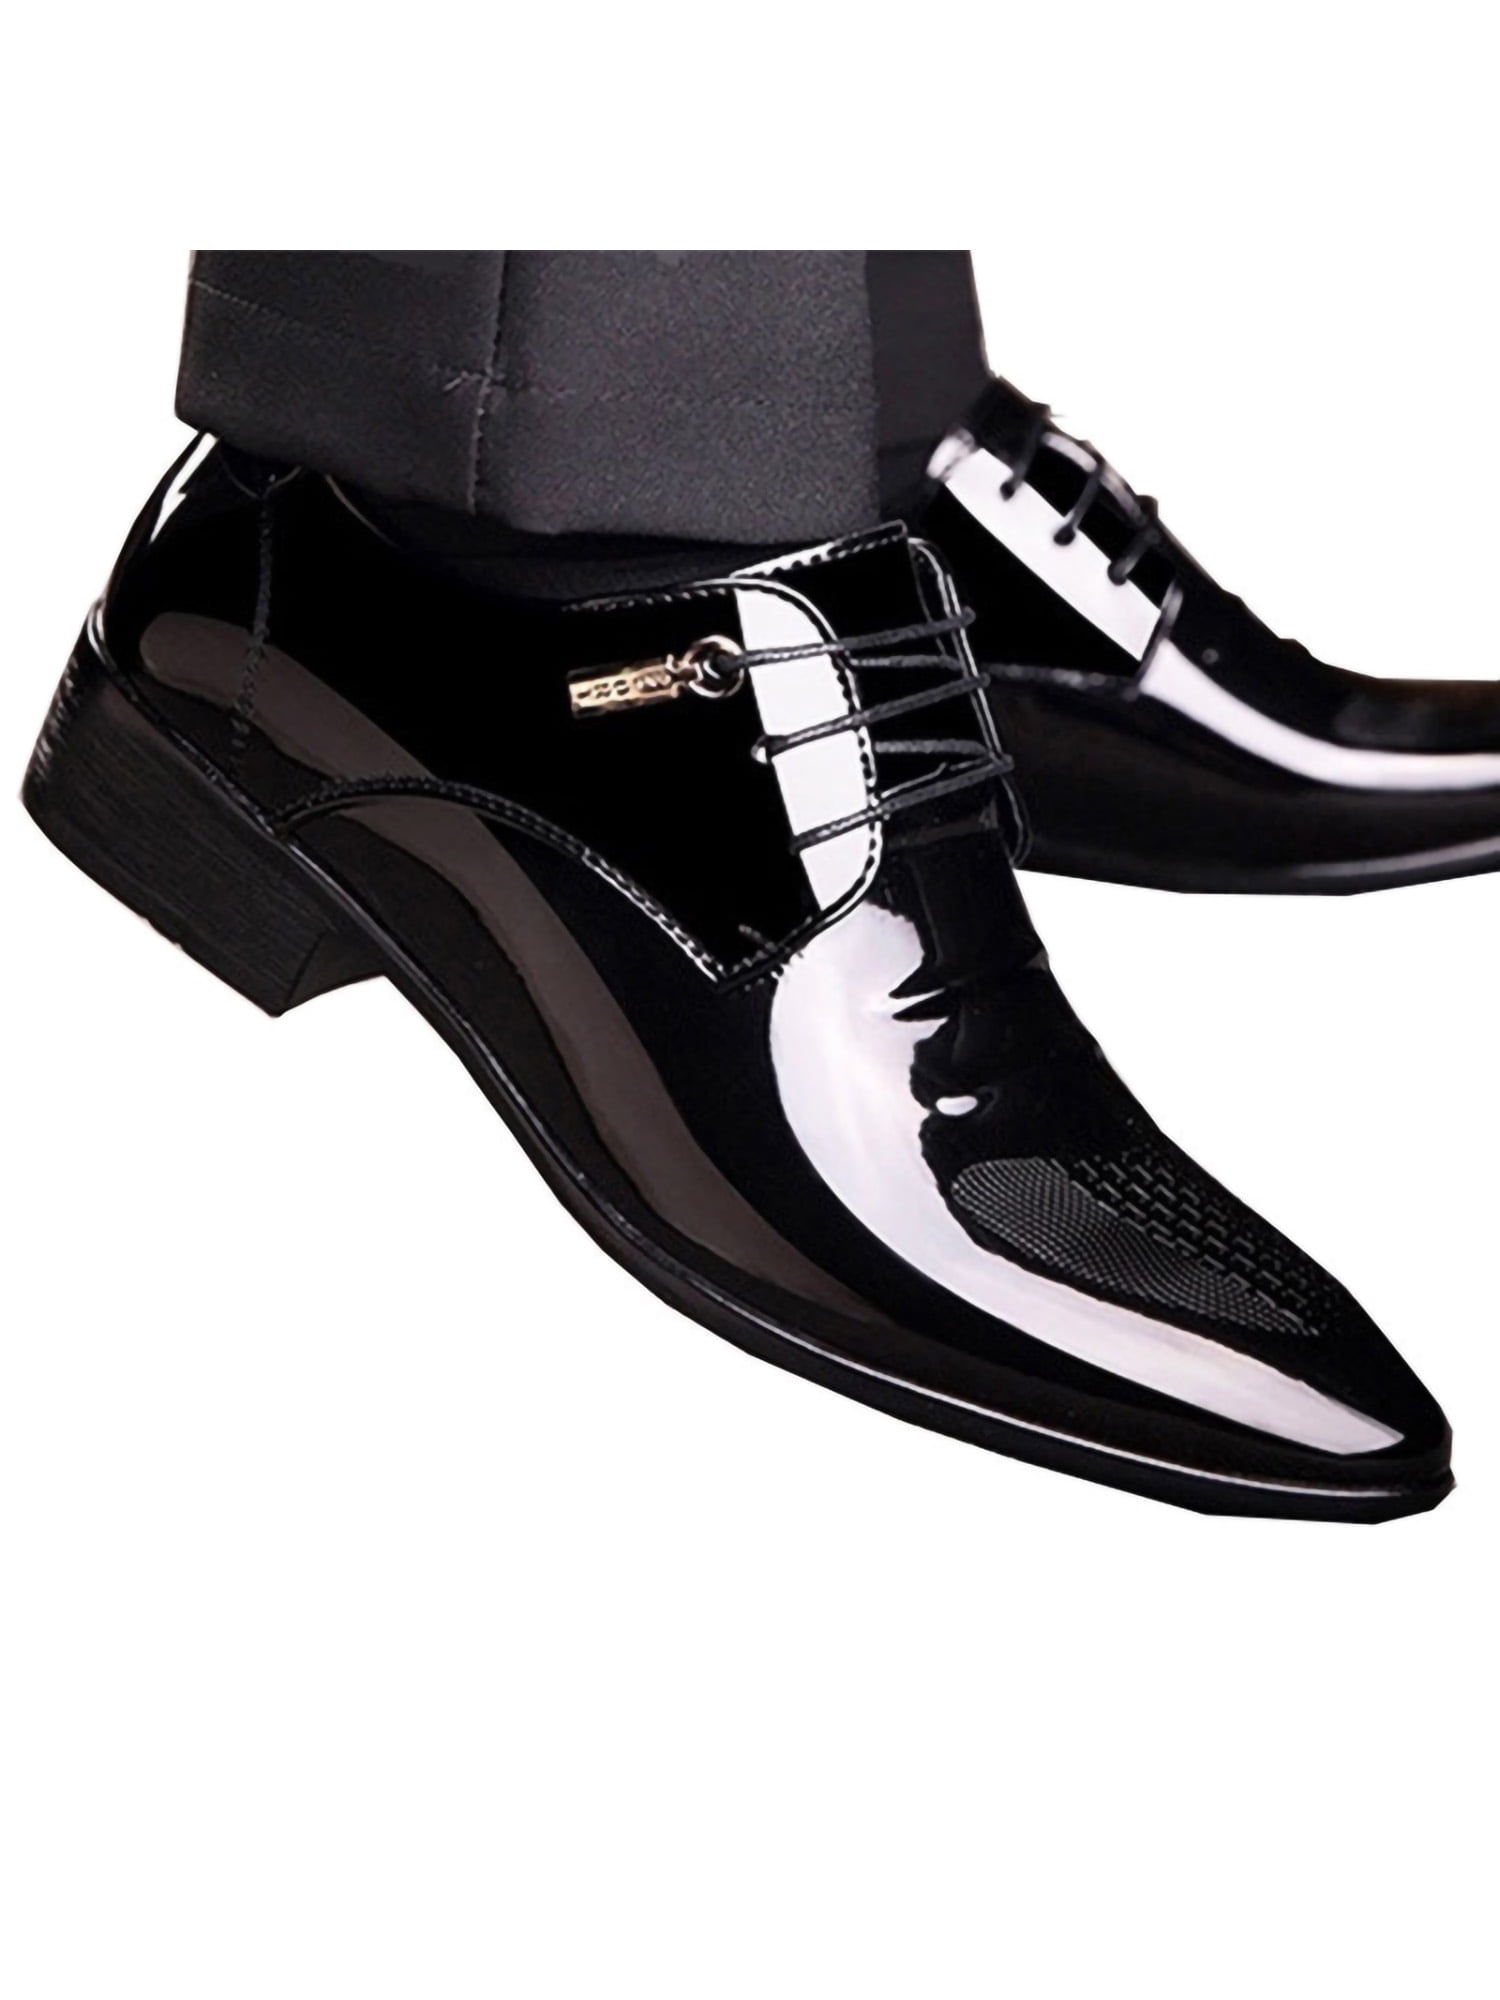 Boys Kids Leather Patent Formal Black Party Oxford Wedding Prom Dress Shoes  US 